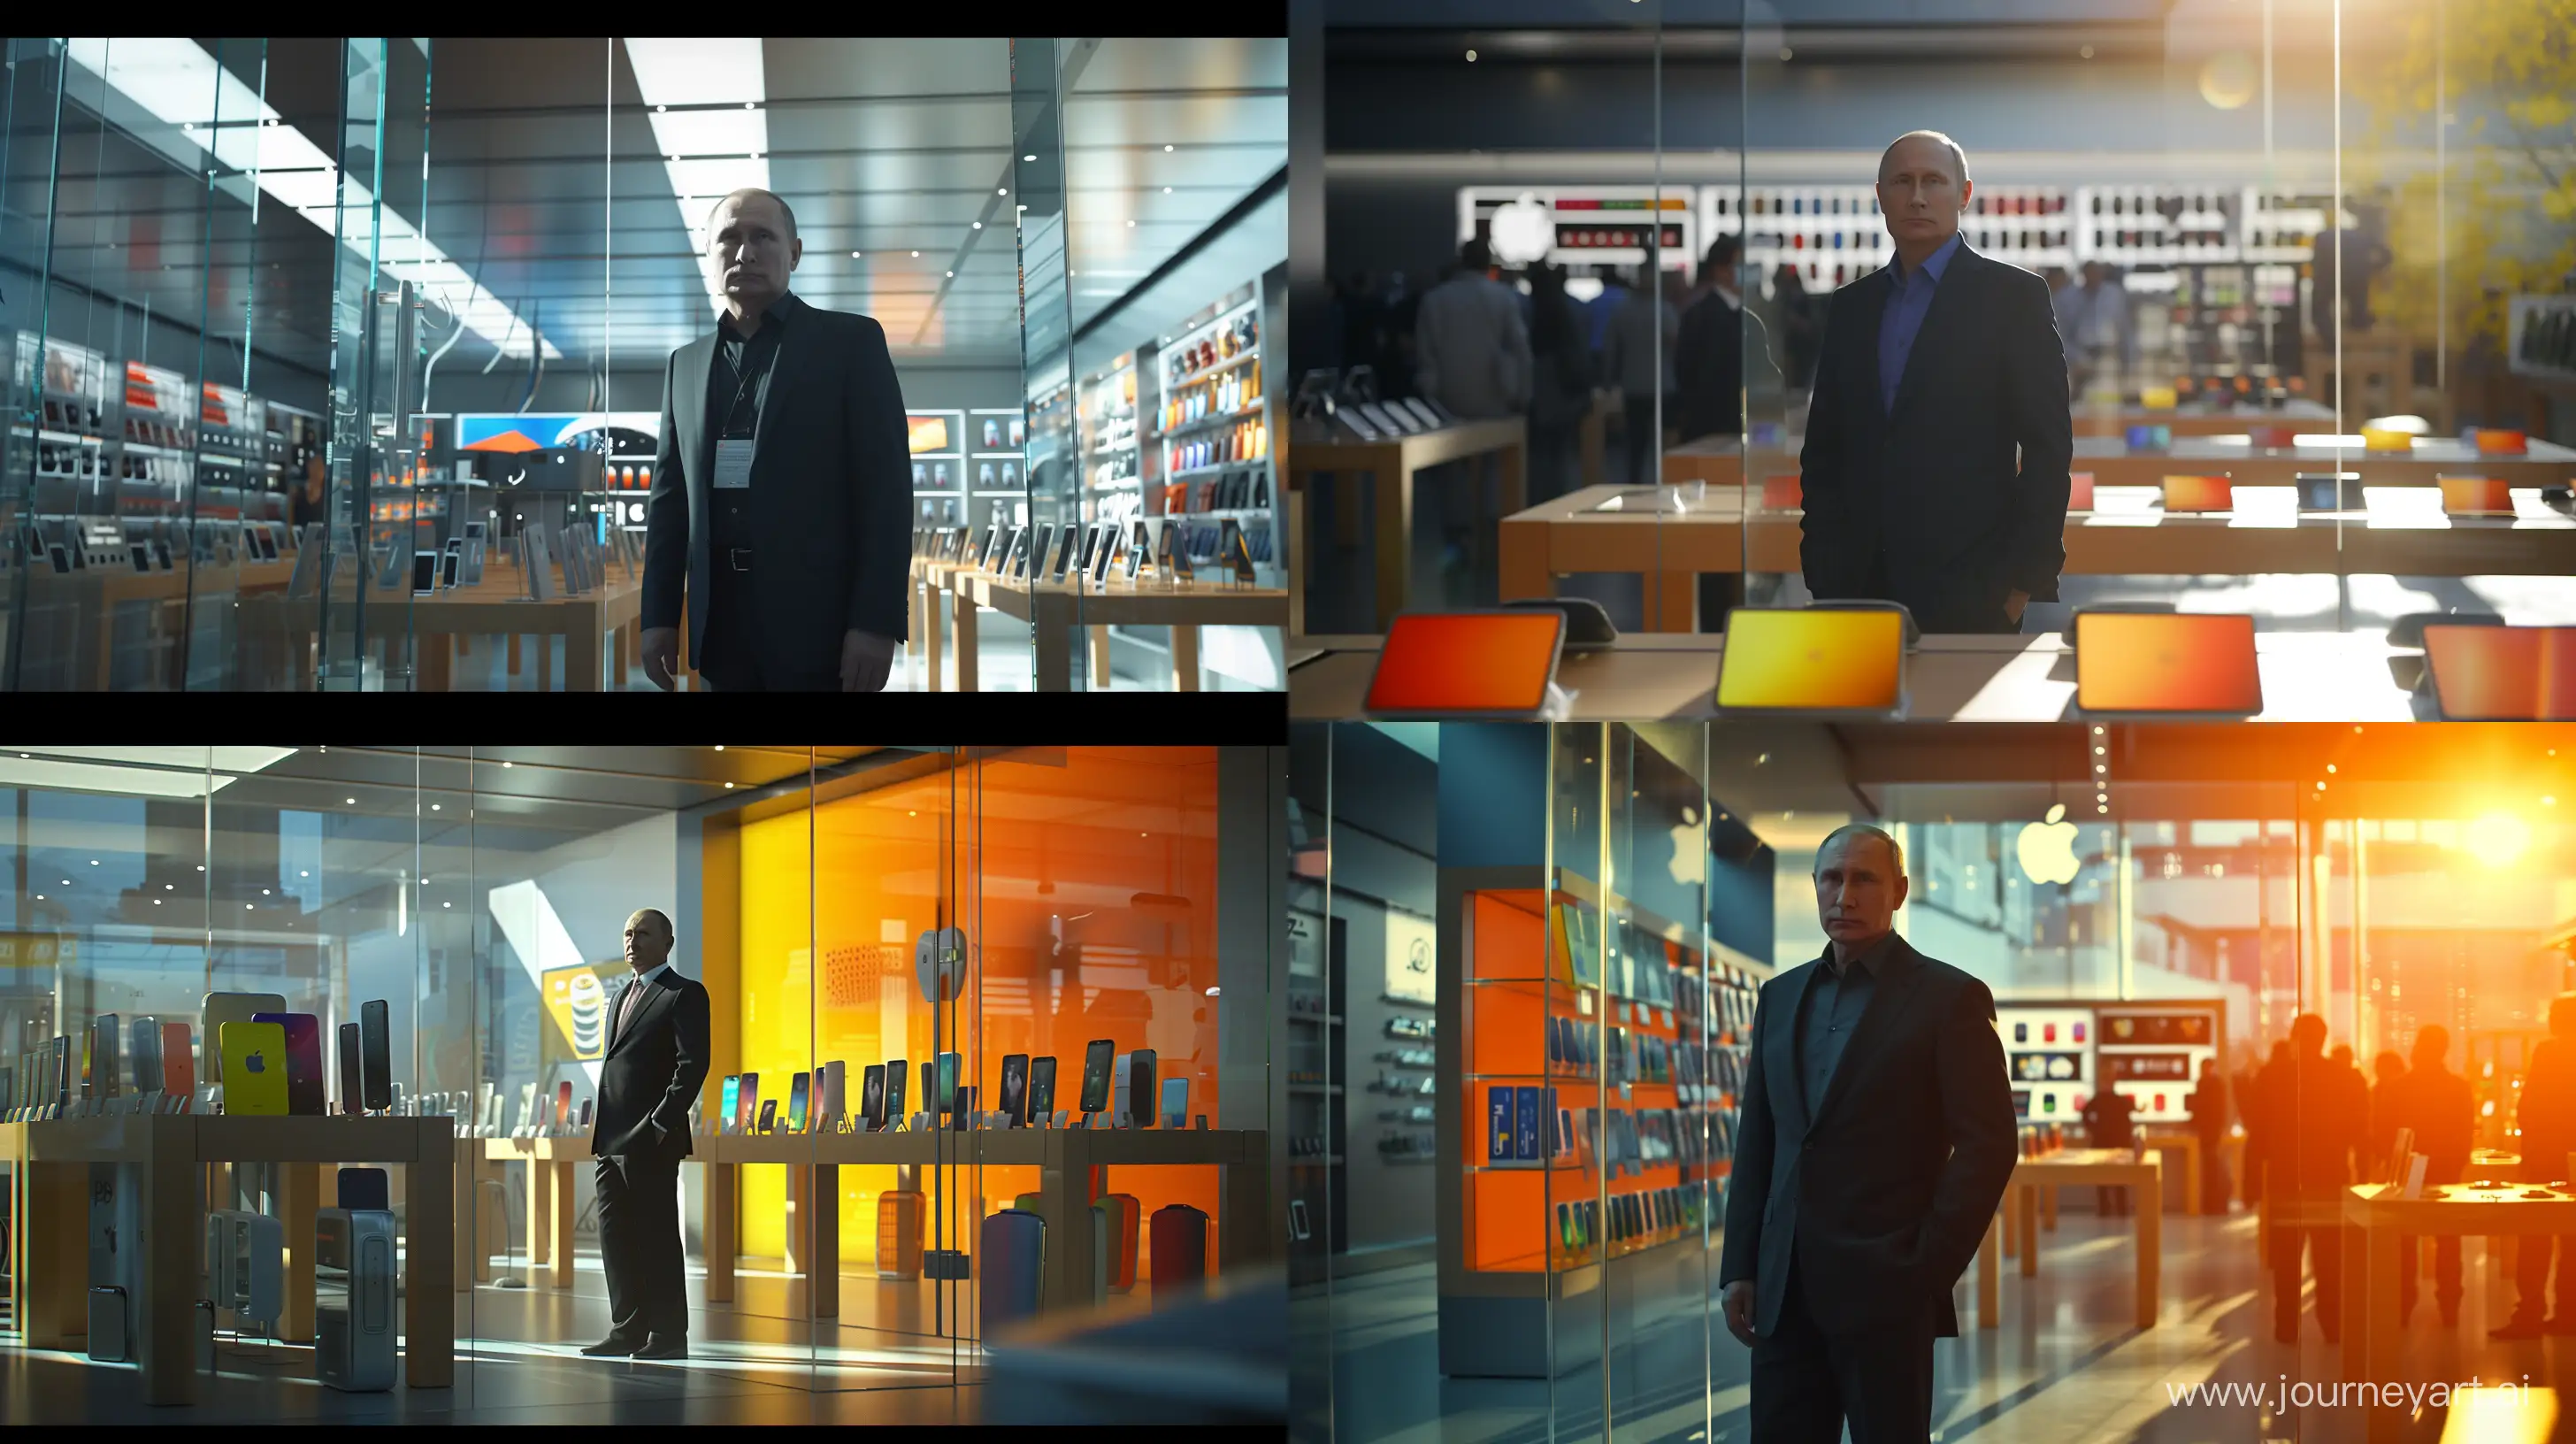 Vladimir Putin at the Apple Store. The scene takes place inside a store where Putin stands among bright and
modern gadgets. He is wearing a dark suit that contrasts with the bright colors of the equipment around him. Lighting
bright and clean, the sun's rays penetrate through the glass walls, creating a play of light and shadow. The image should be
rendered with high resolution and clear lines to emphasize the modern and technological nature of the scene.
The mood of the scene is impressive and powerful, capturing the power of technology and Putin's influence in this world --ar 16:9 --v 6.0 --q 2